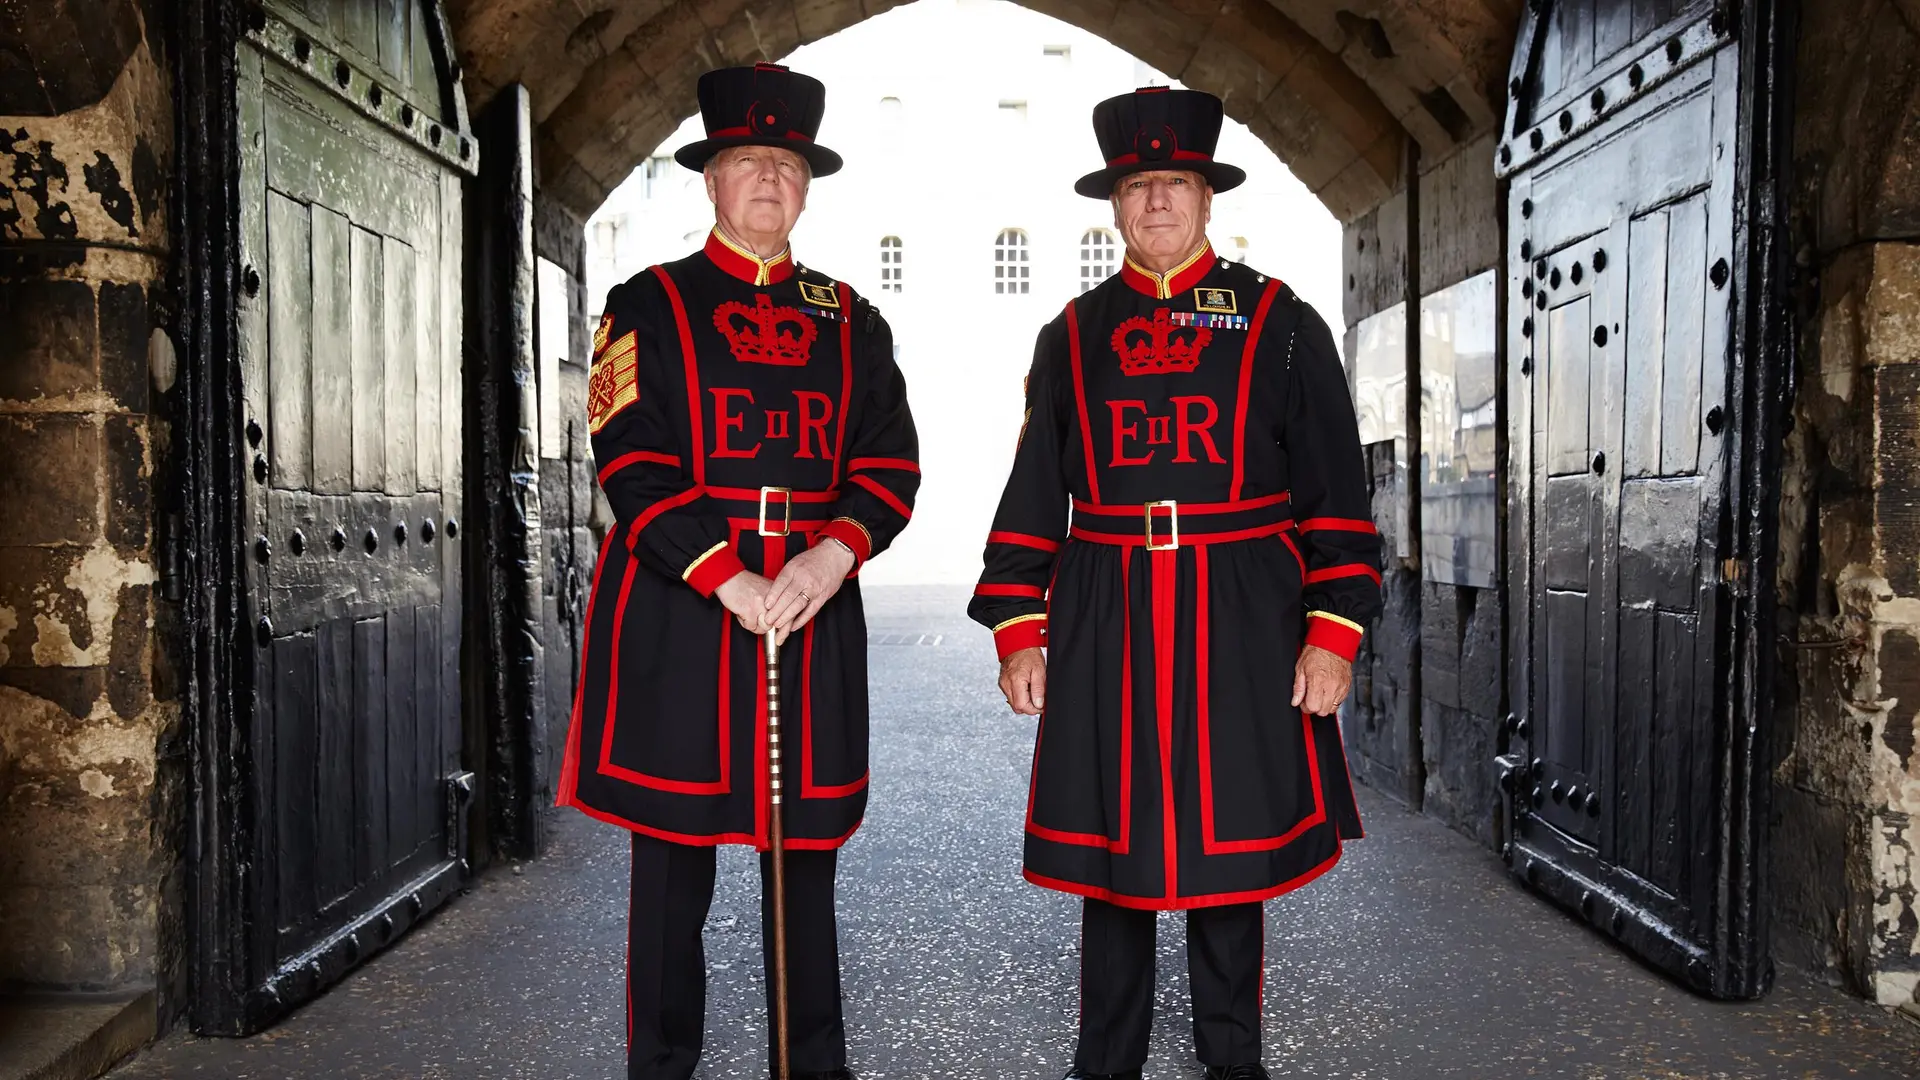 The Beefeaters guard at The Tower of London